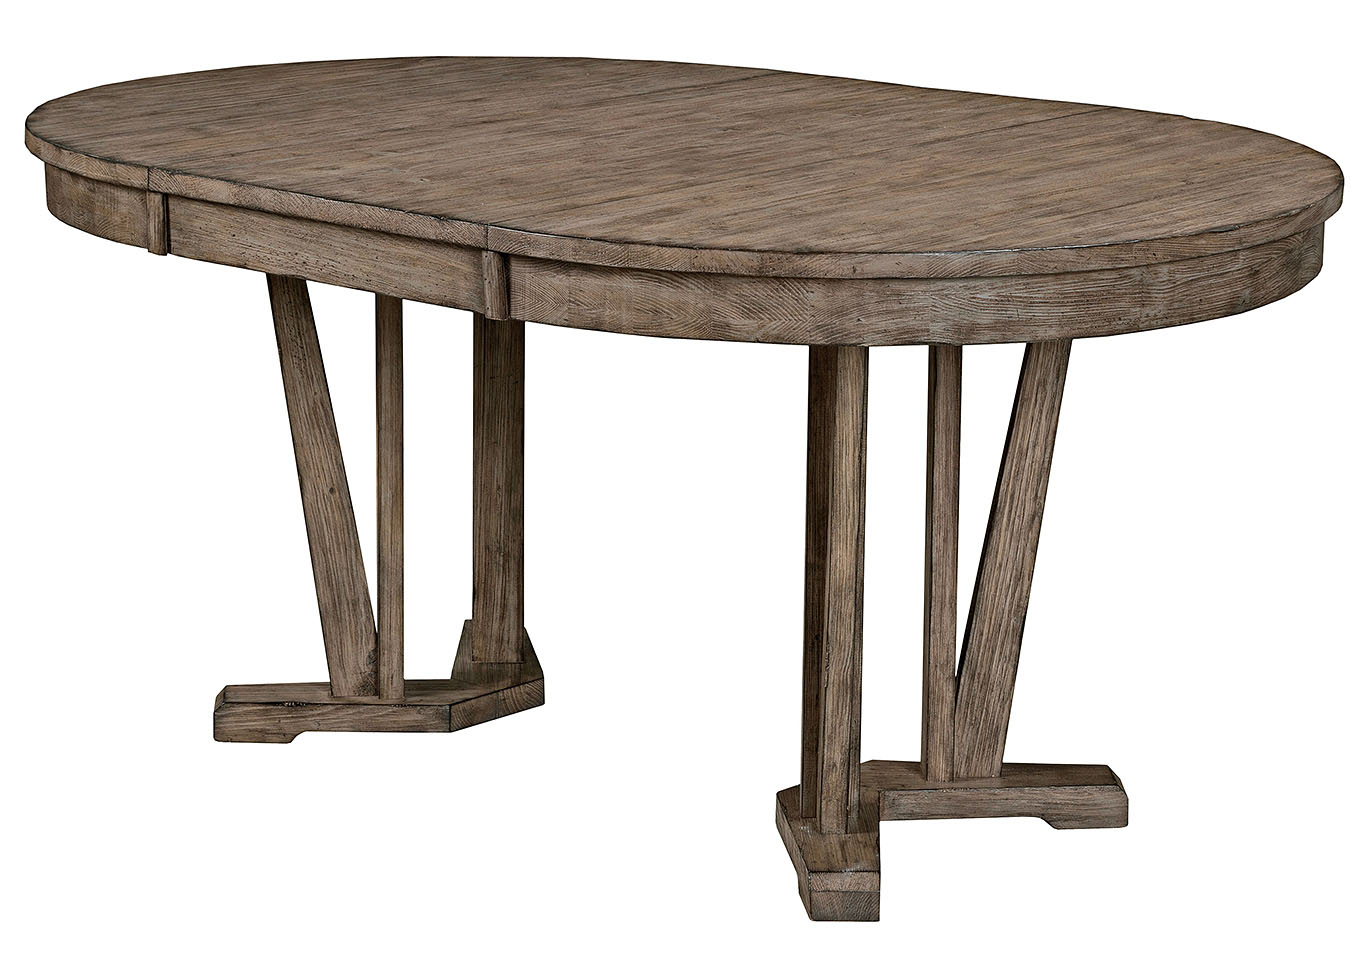 Foundry Driftwood Round Dining Table,Kincaid